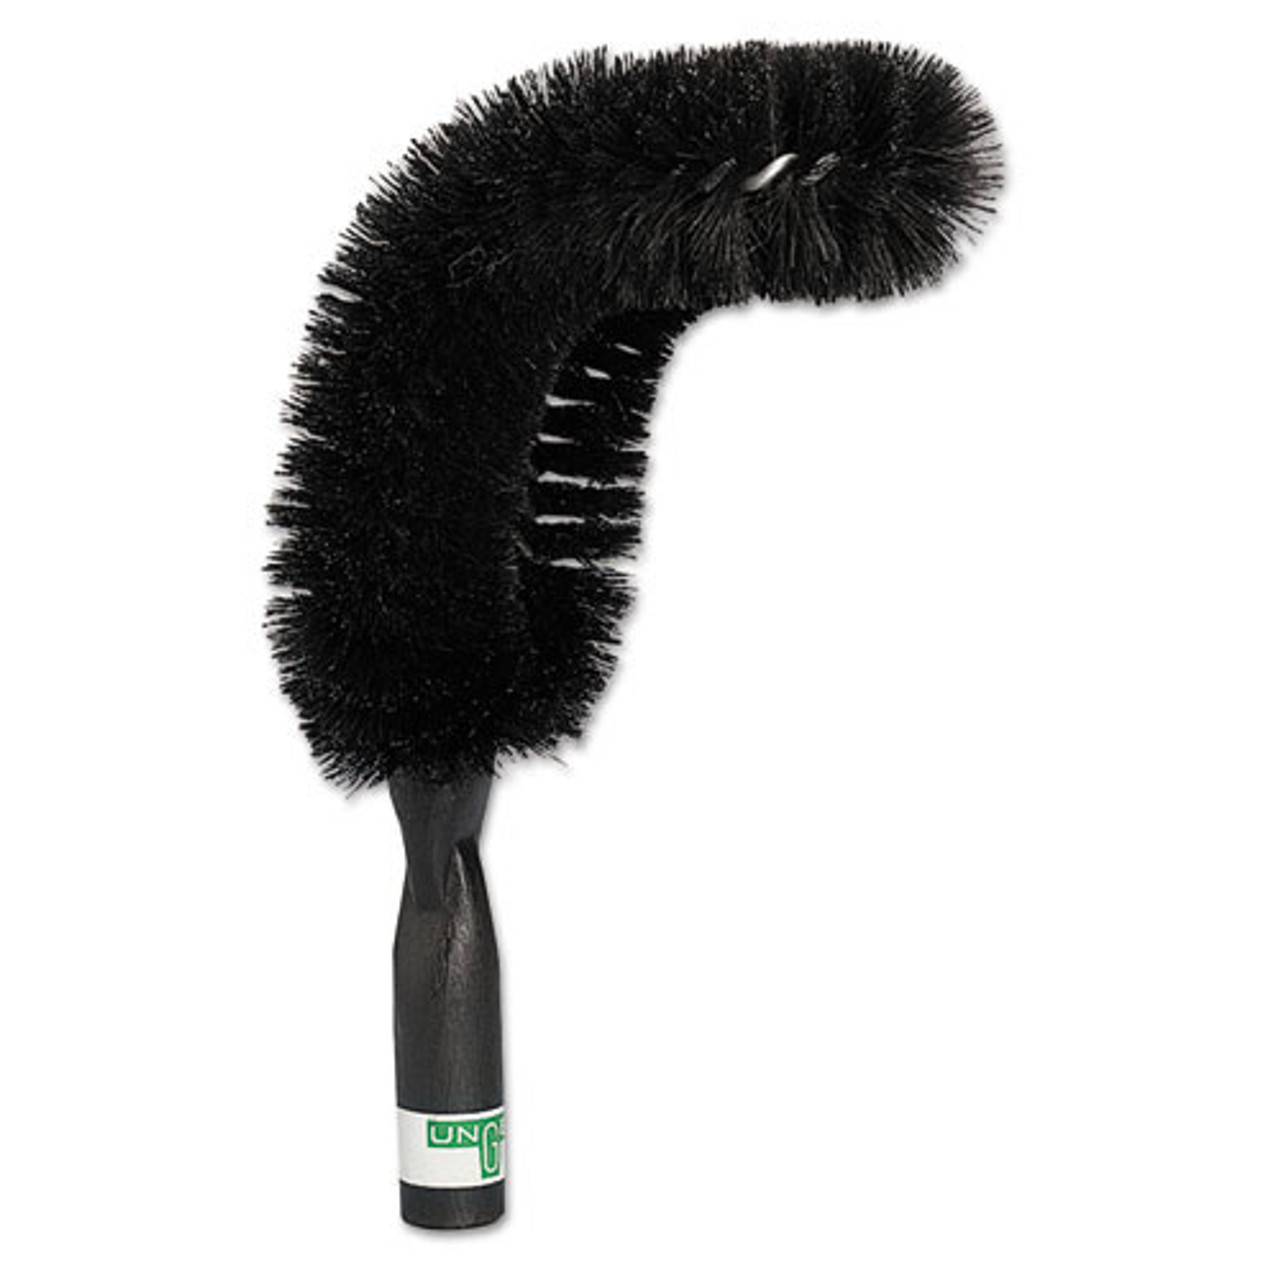 Ung PB45A Sanitary Brush with Squeegee 18 in.